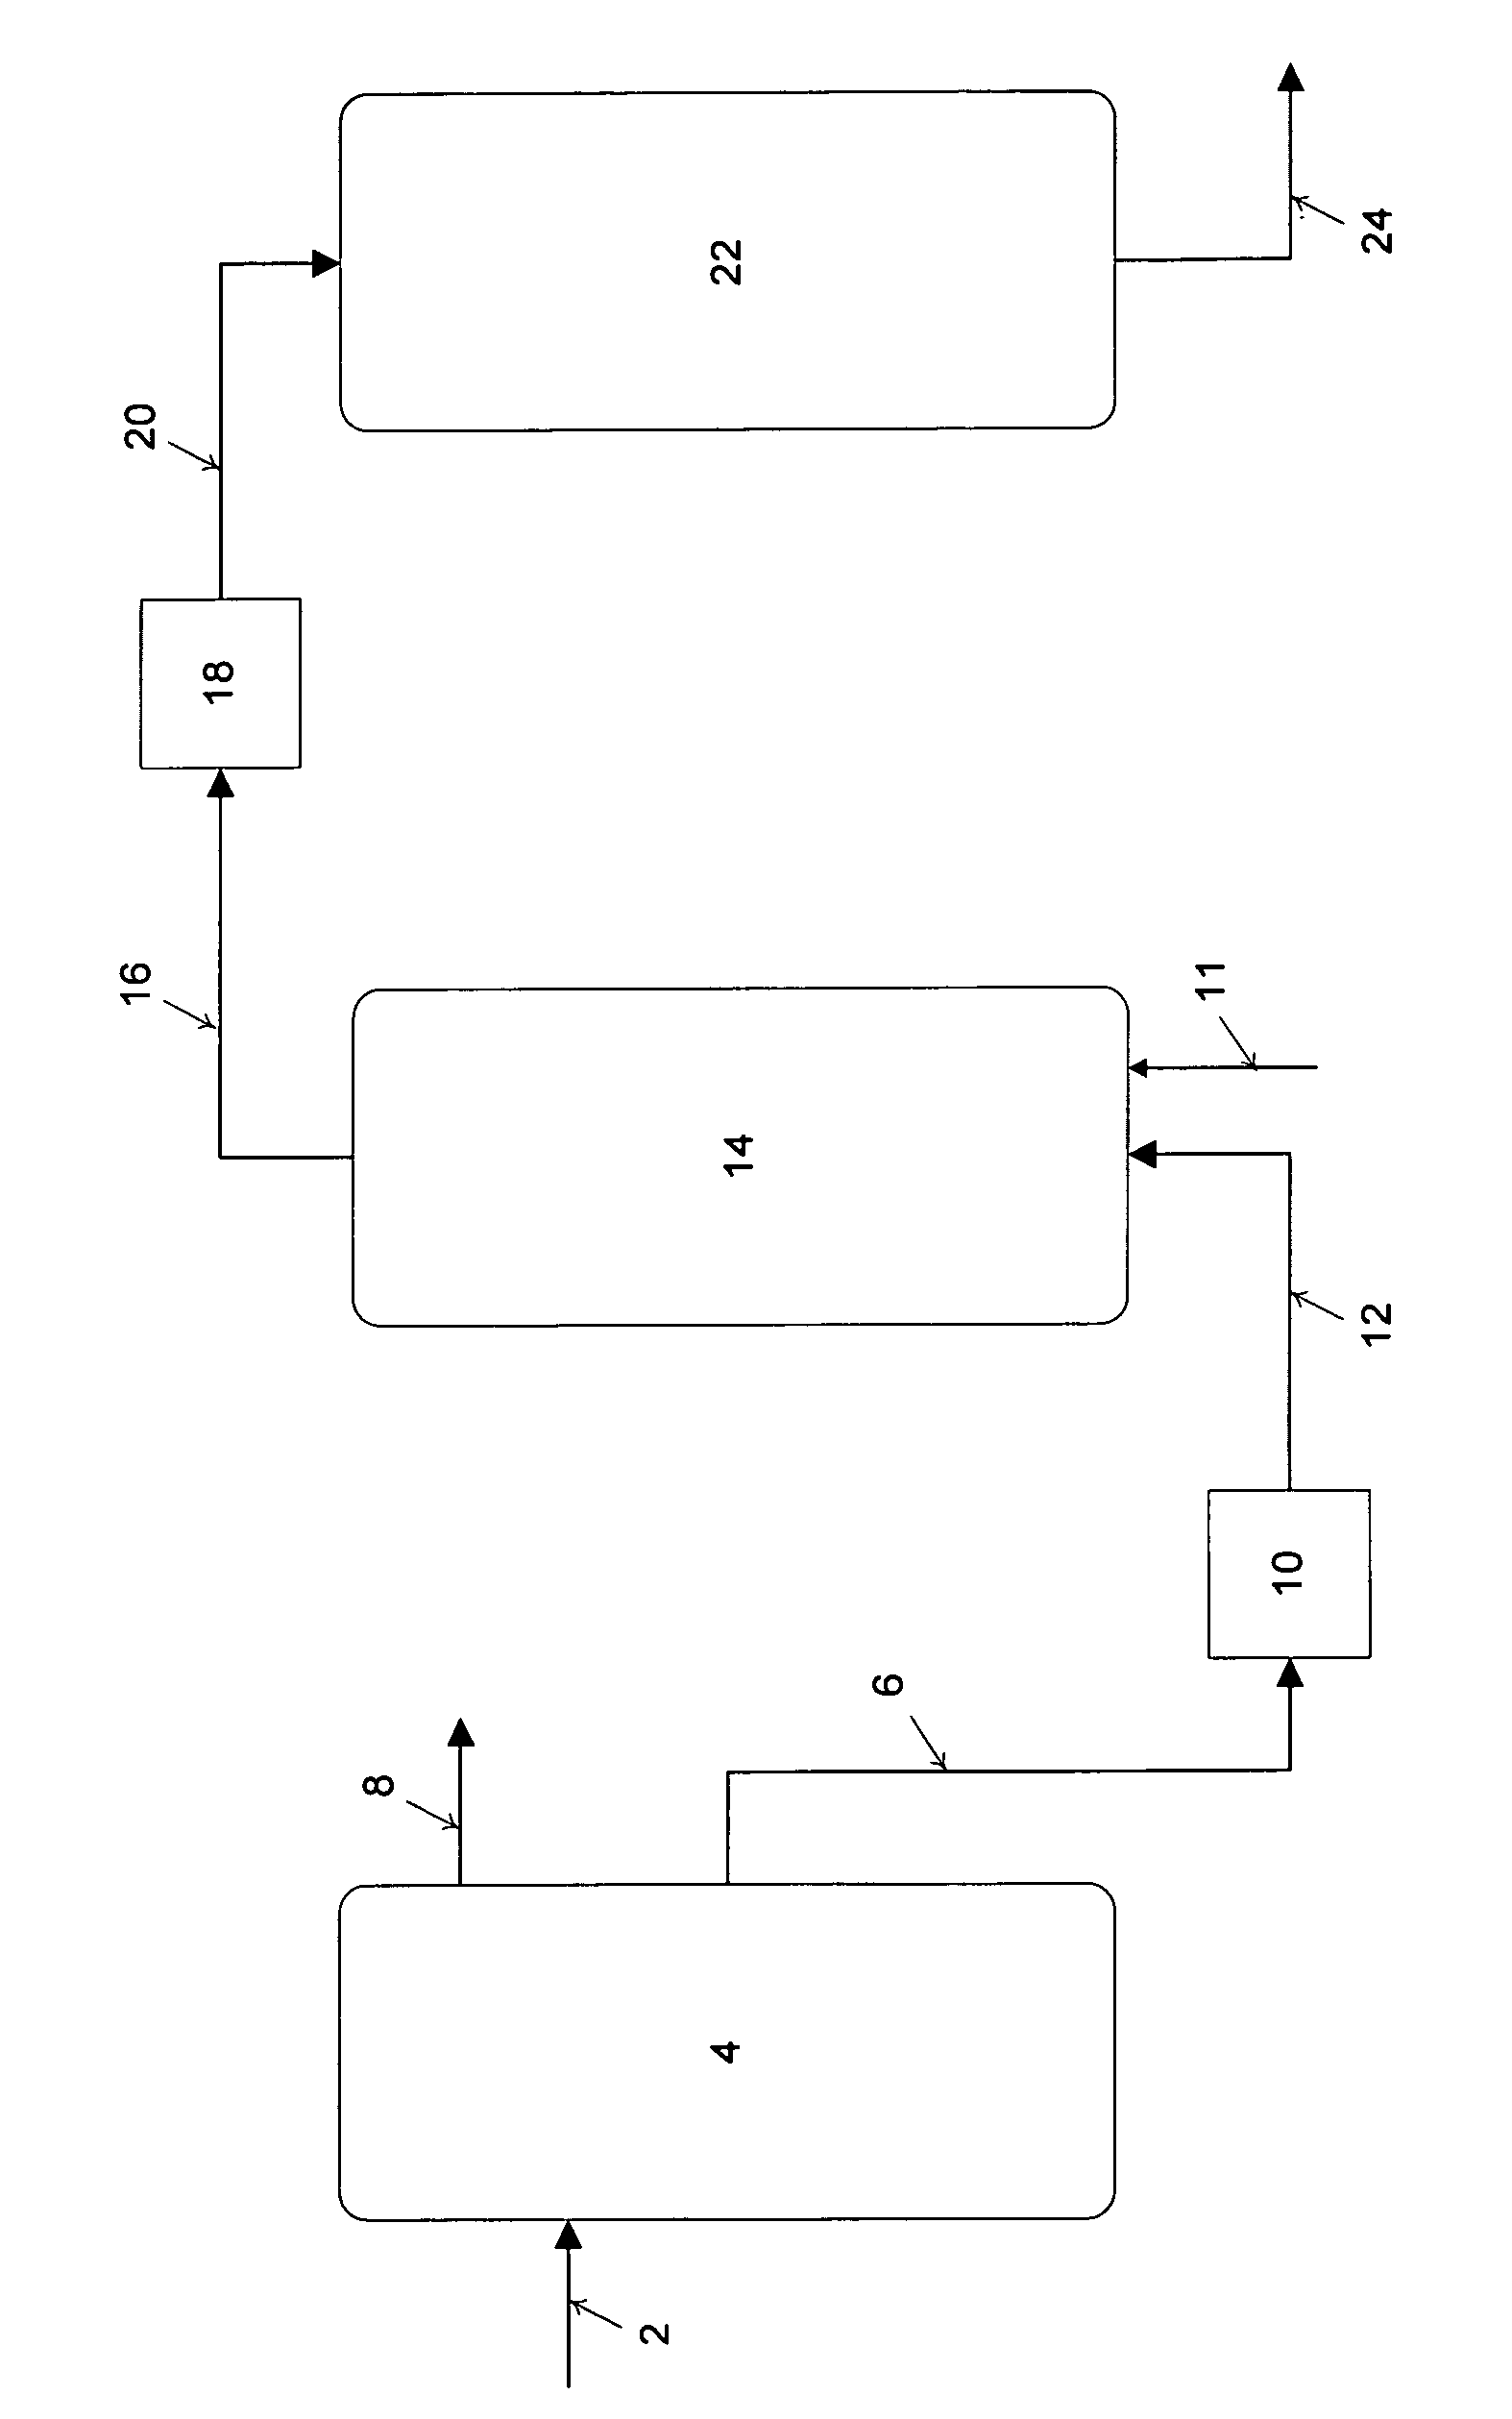 Process for removing contaminants from Fischer-Tropsch feed streams